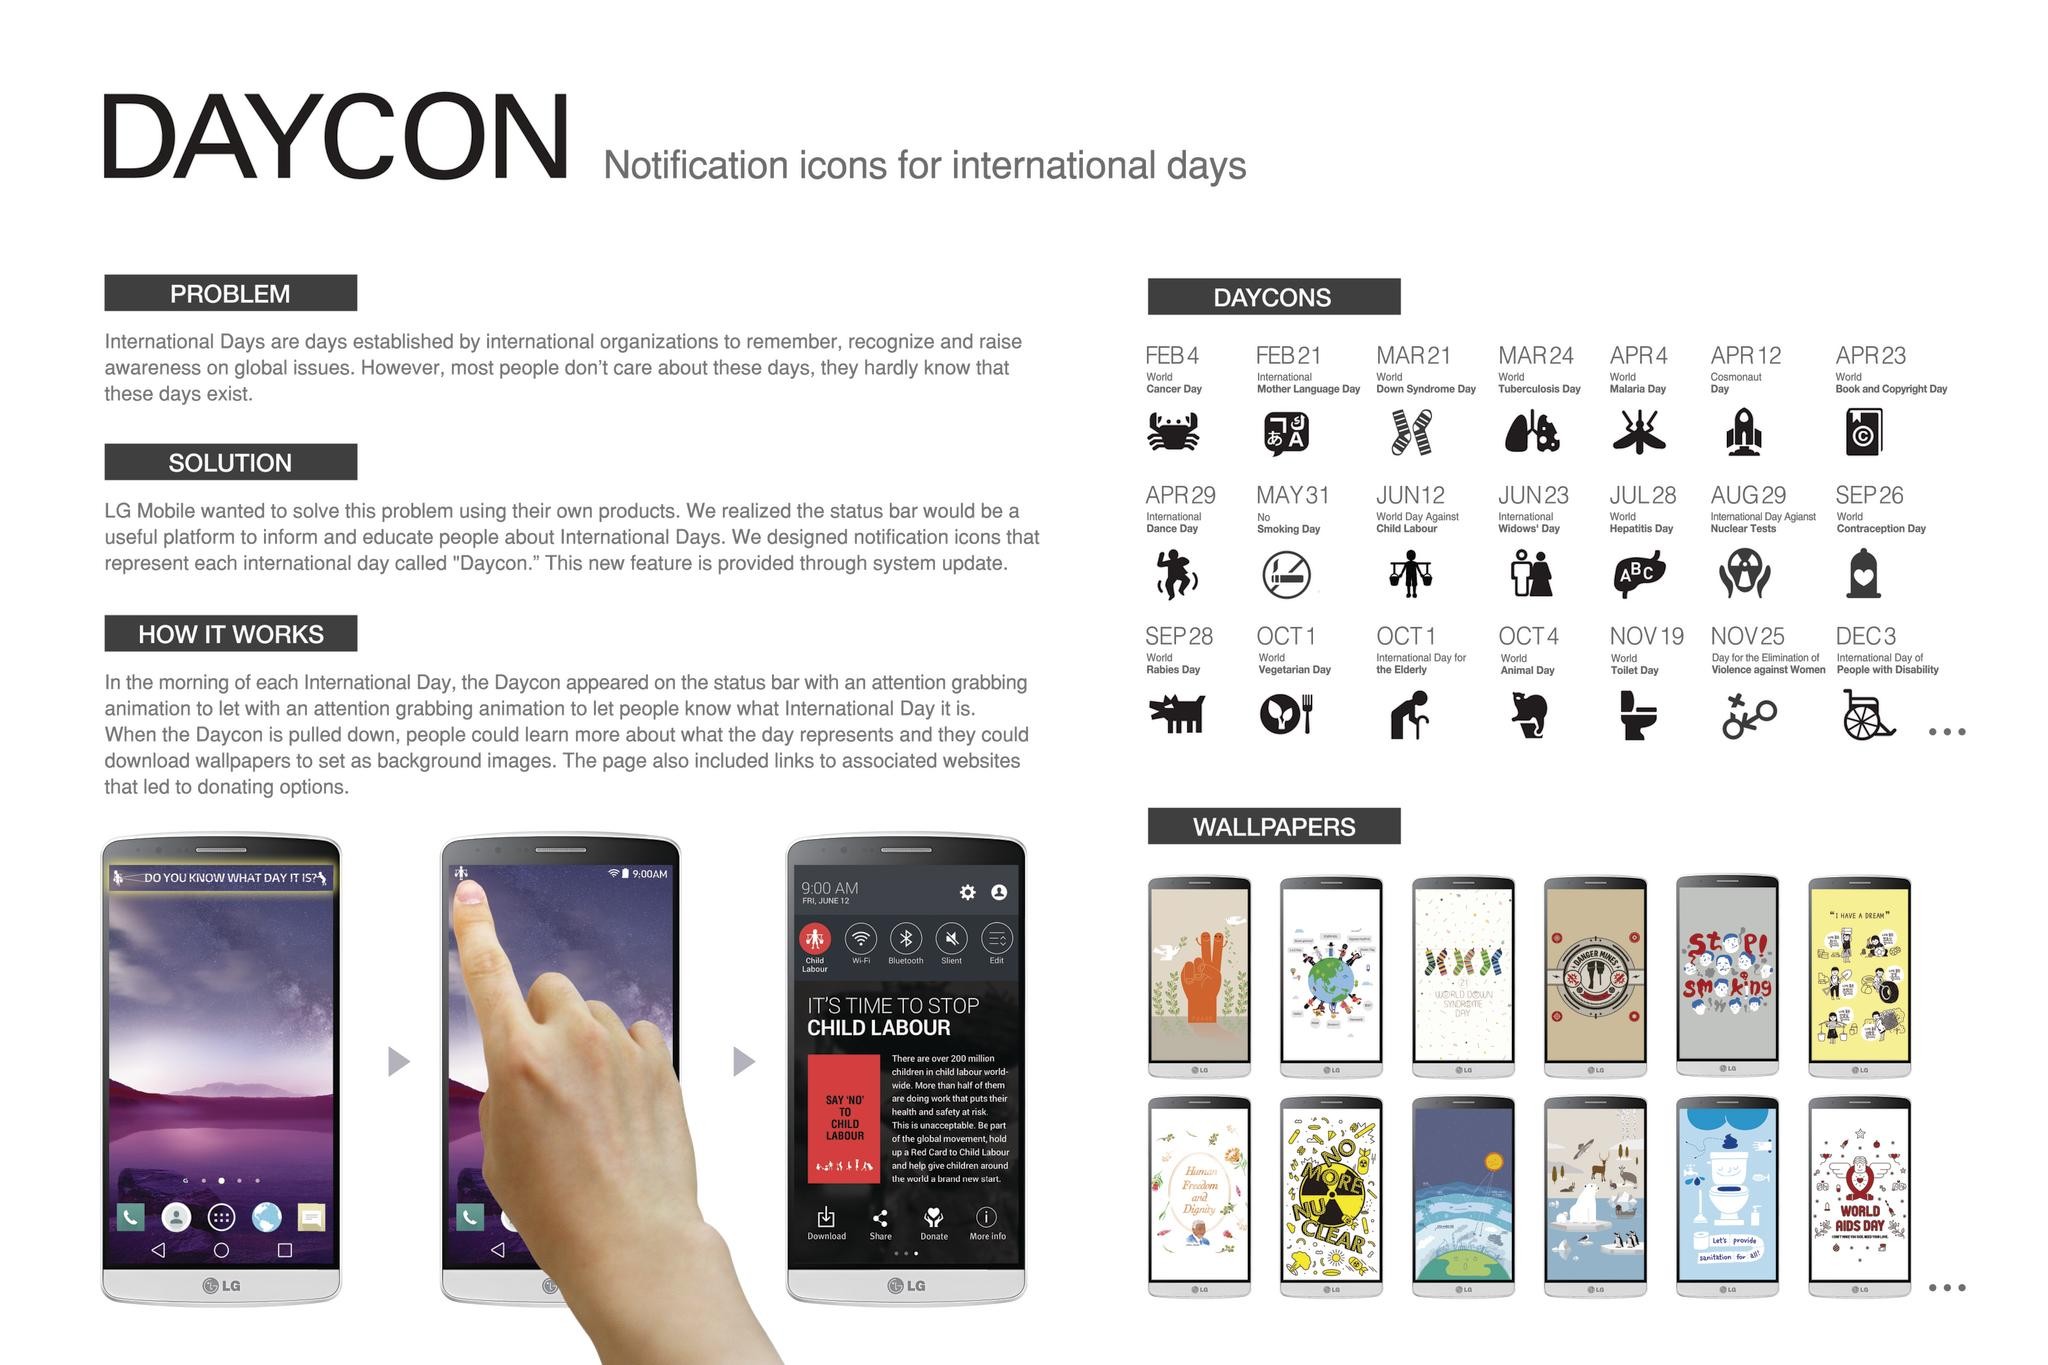 DAYCON - NOTIFICATION ICONS FOR INTERNATIONAL DAYS